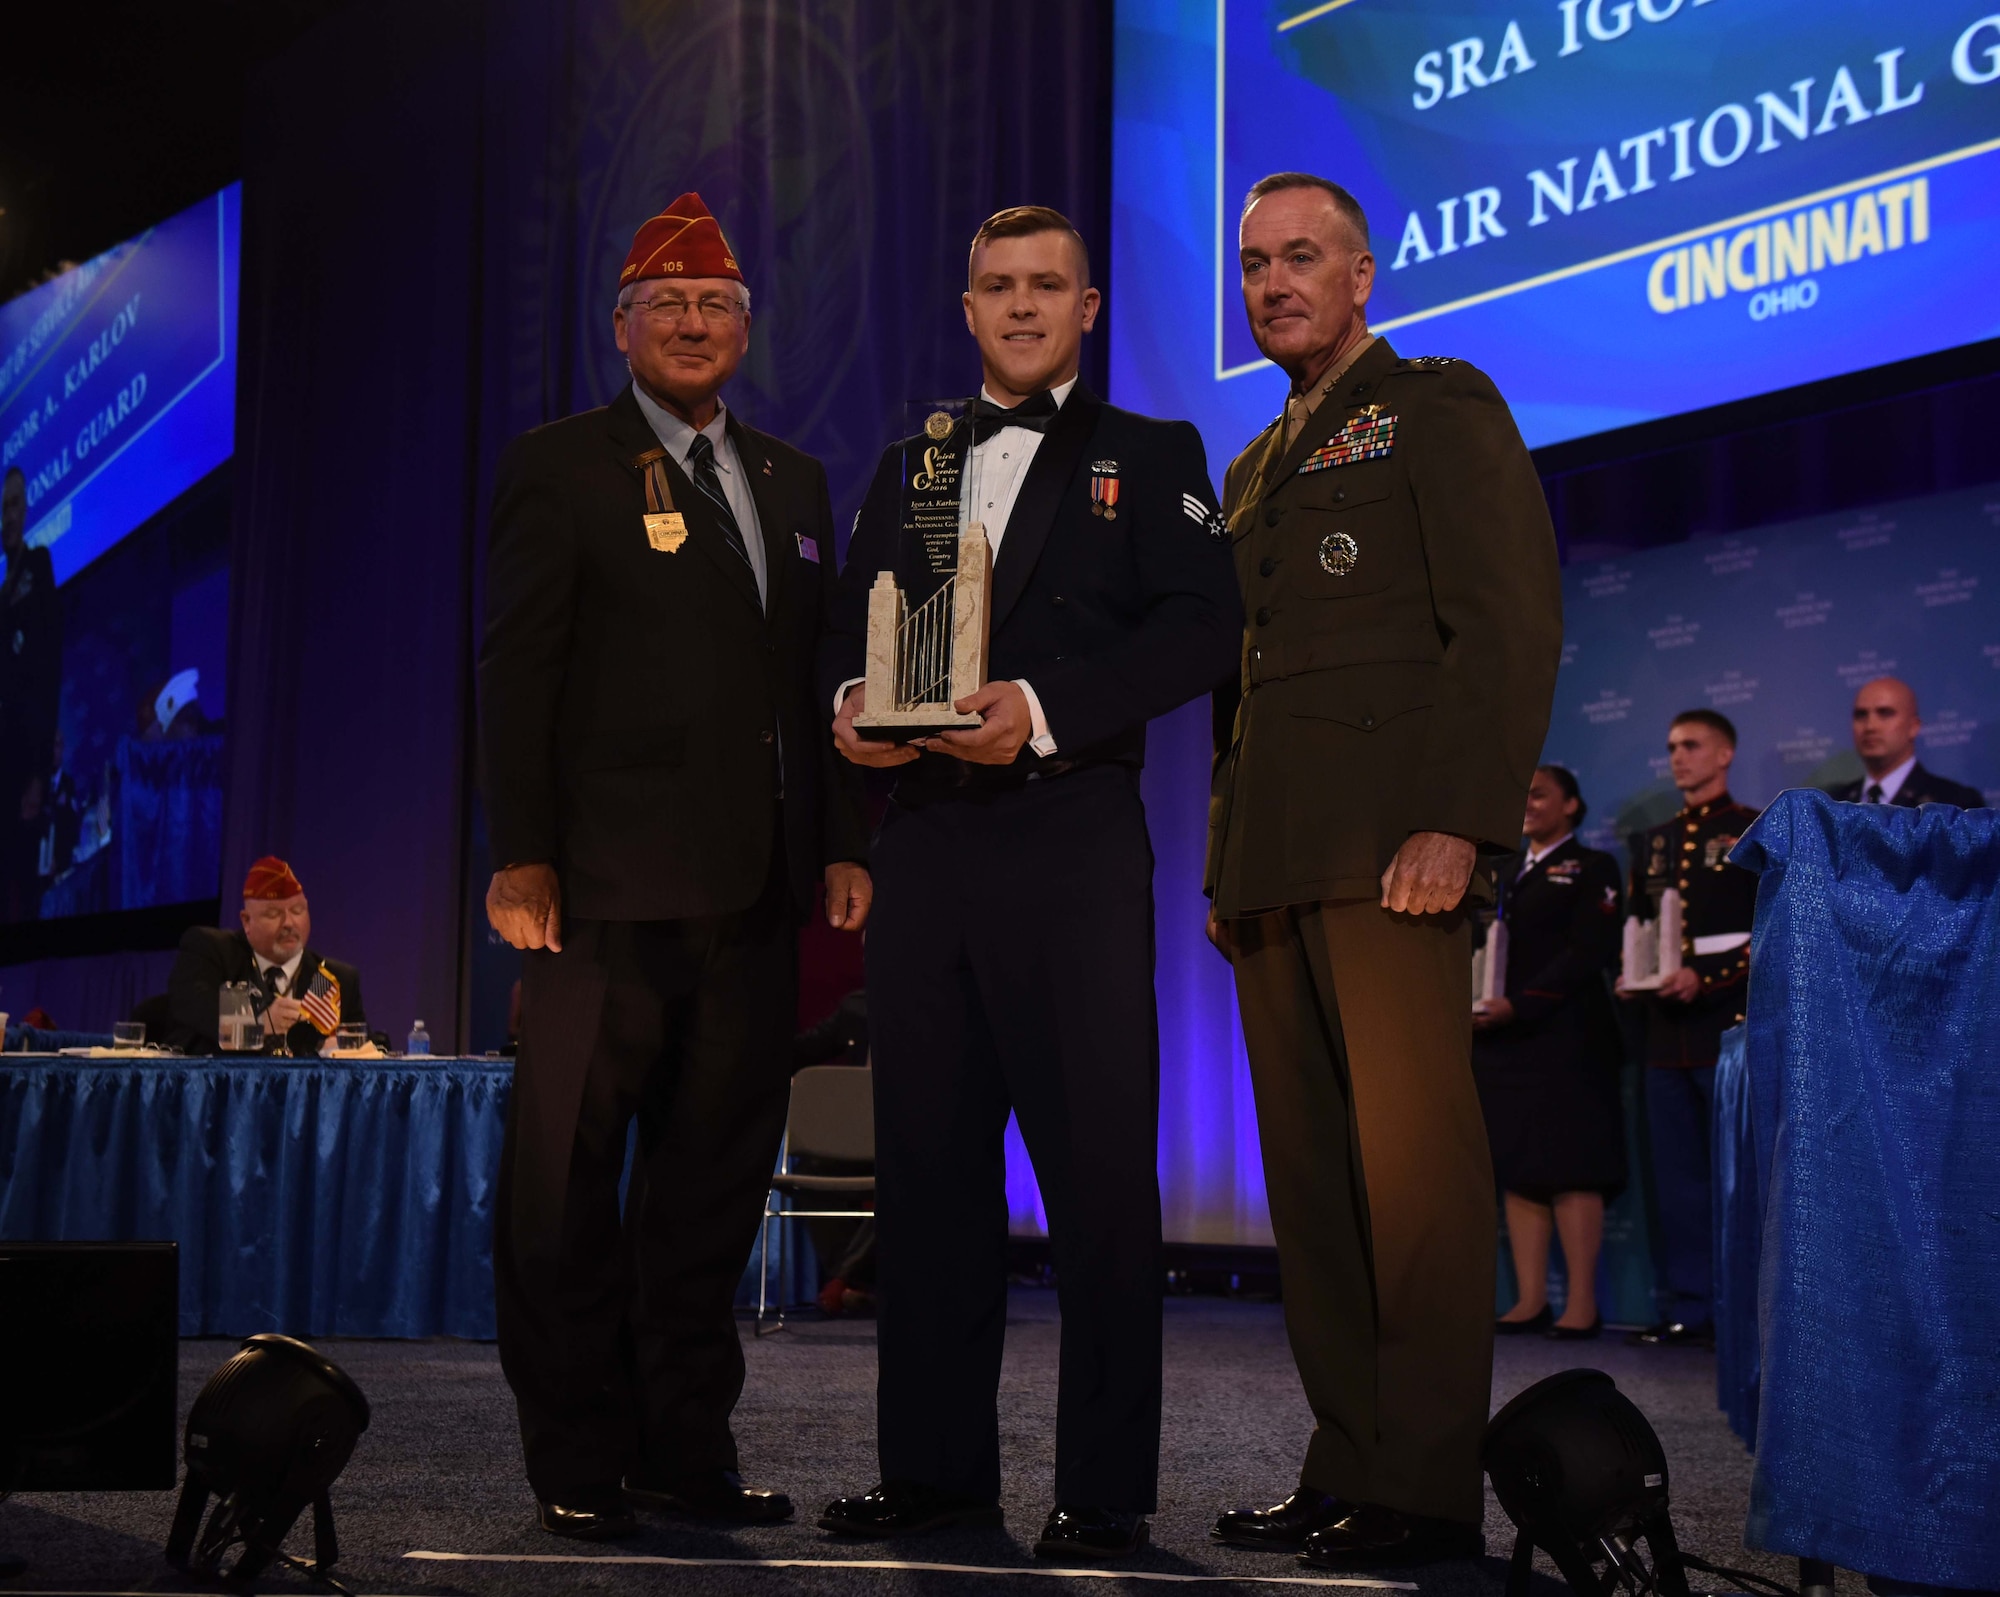 Senior Airman Igor Karlov, a 111th Logistics Readiness Squadron supply technician, receives The American Legion Spirit of Service Award from The American Legion National Commander Dale Barnett and Chairman of the Joint Chiefs of Staff Gen. Joseph F. Dunford during The American Legion’s 98th National Convention at the Duke Energy Convention Center, Cincinnati, Ohio, Aug. 30, 2016. Karlov, a Pa. Air National Guard member, was the first-ever Guardsman to receive The American Legion Spirit of Service Award in the 17 years it has been awarded to military members. (U.S. Air National Guard photo by Tech. Sgt. Andria Allmond)